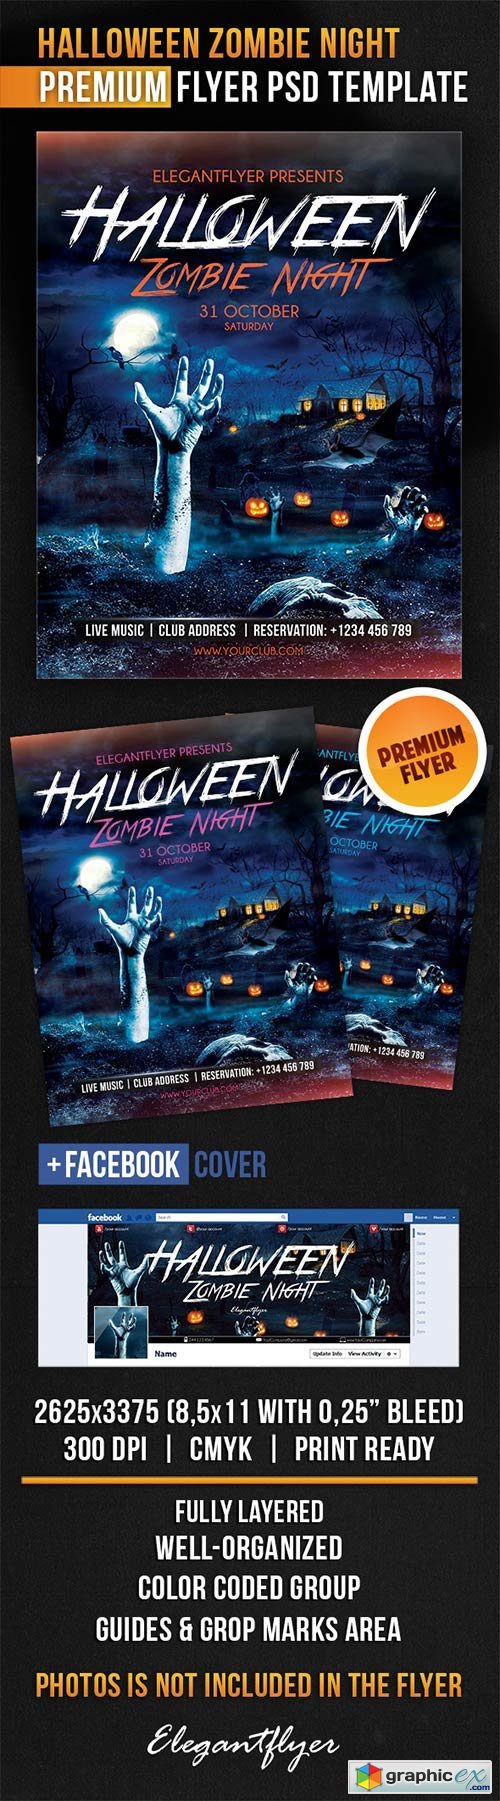 Halloween Zombie Night Flyer PSD Template + Facebook Cover